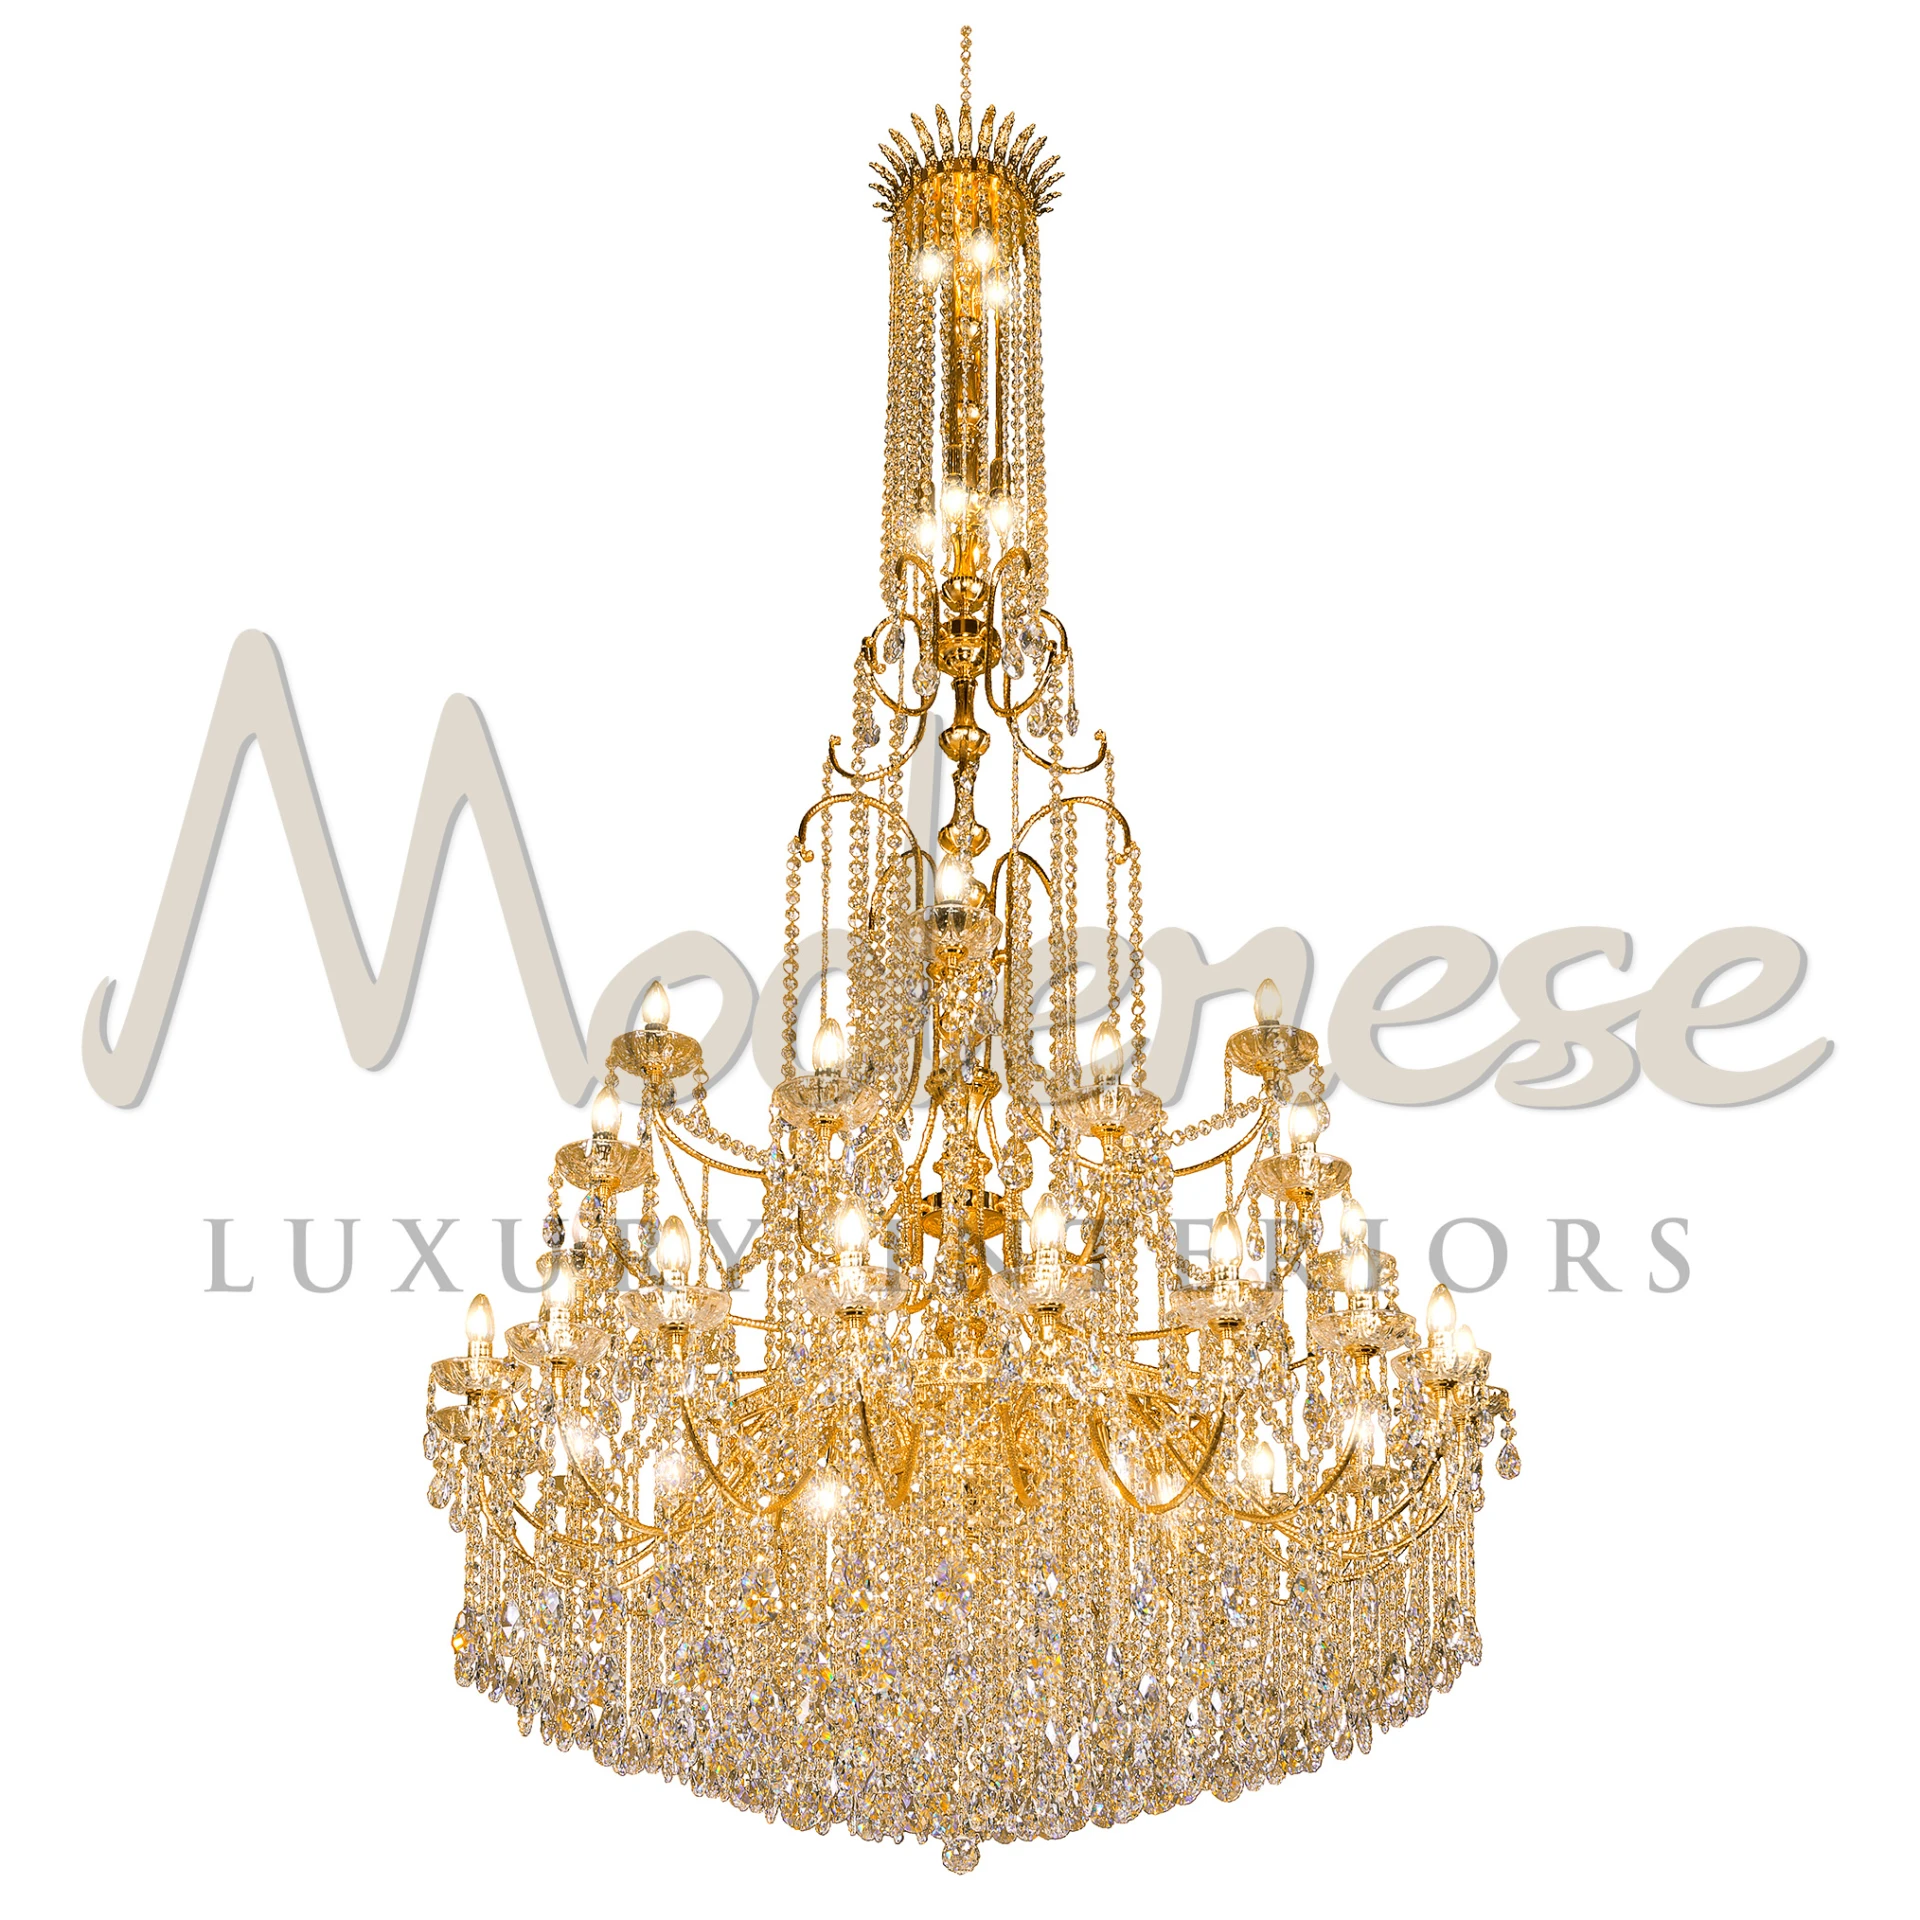 The luxurious Venetian Splendor Chandelier with intricate golden details and luminous crystals